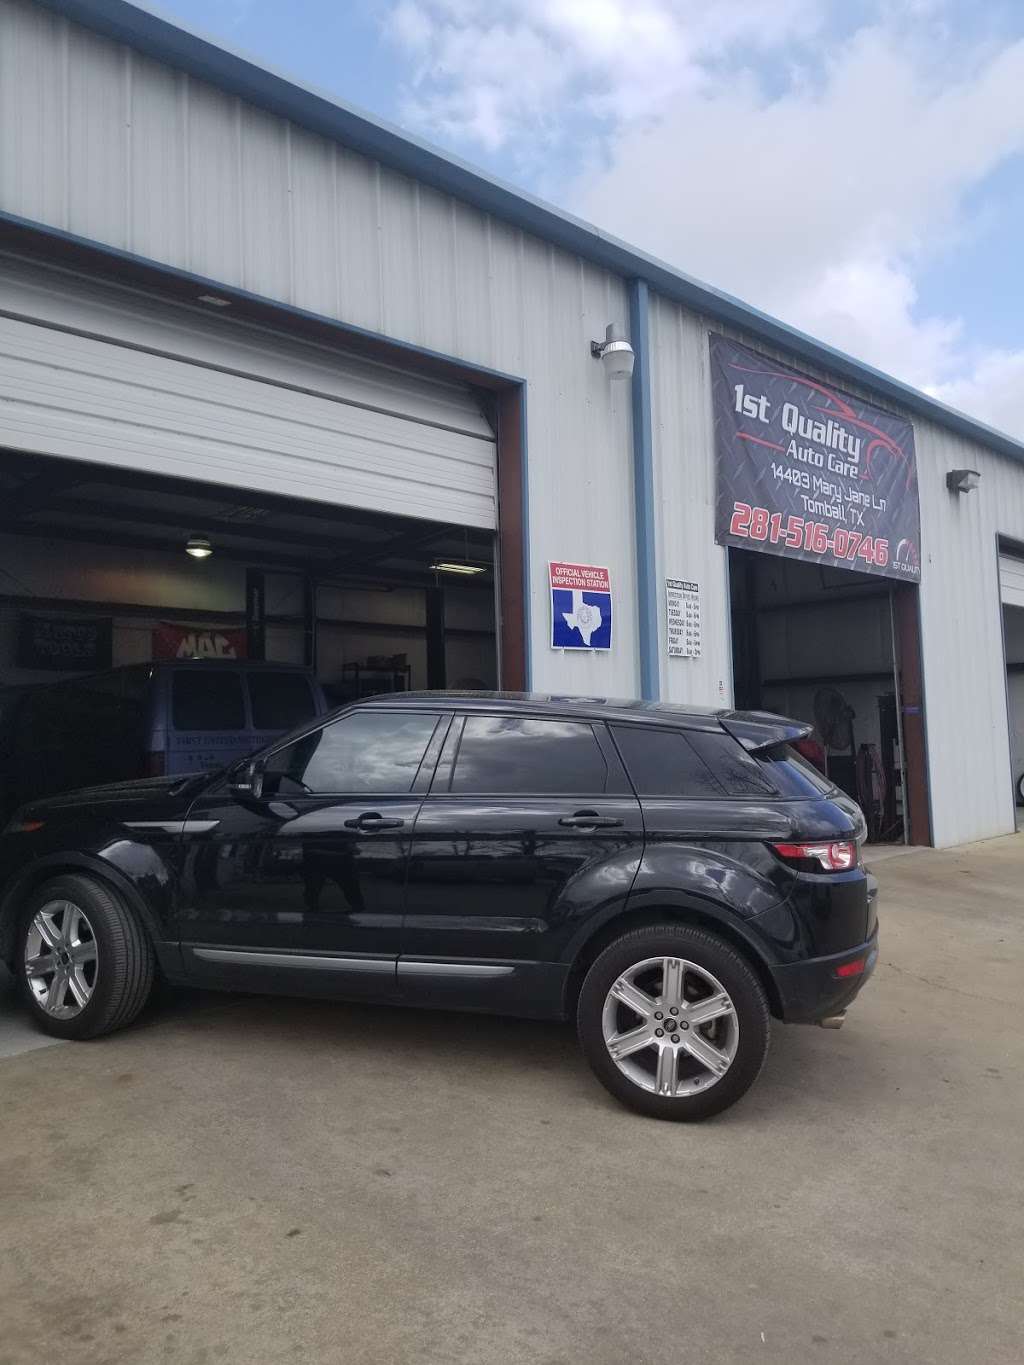 1st Quality Auto Care | 14403 Mary Jane Ln, Tomball, TX 77377 | Phone: (281) 516-0746